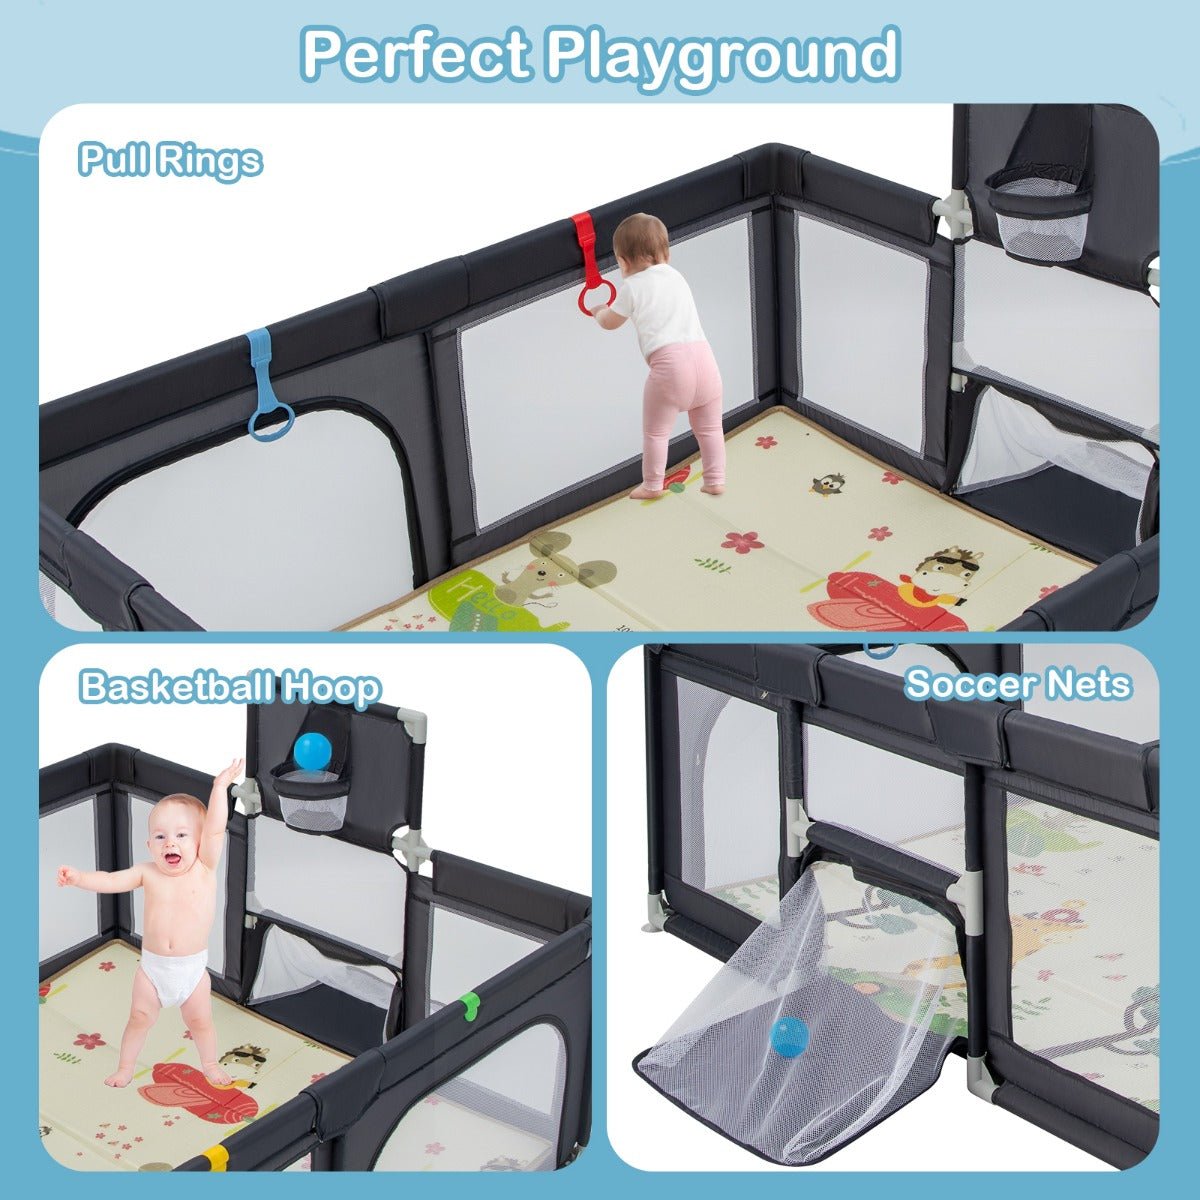 Enhance Playtime with the Dark Grey Playpen - Buy Now!